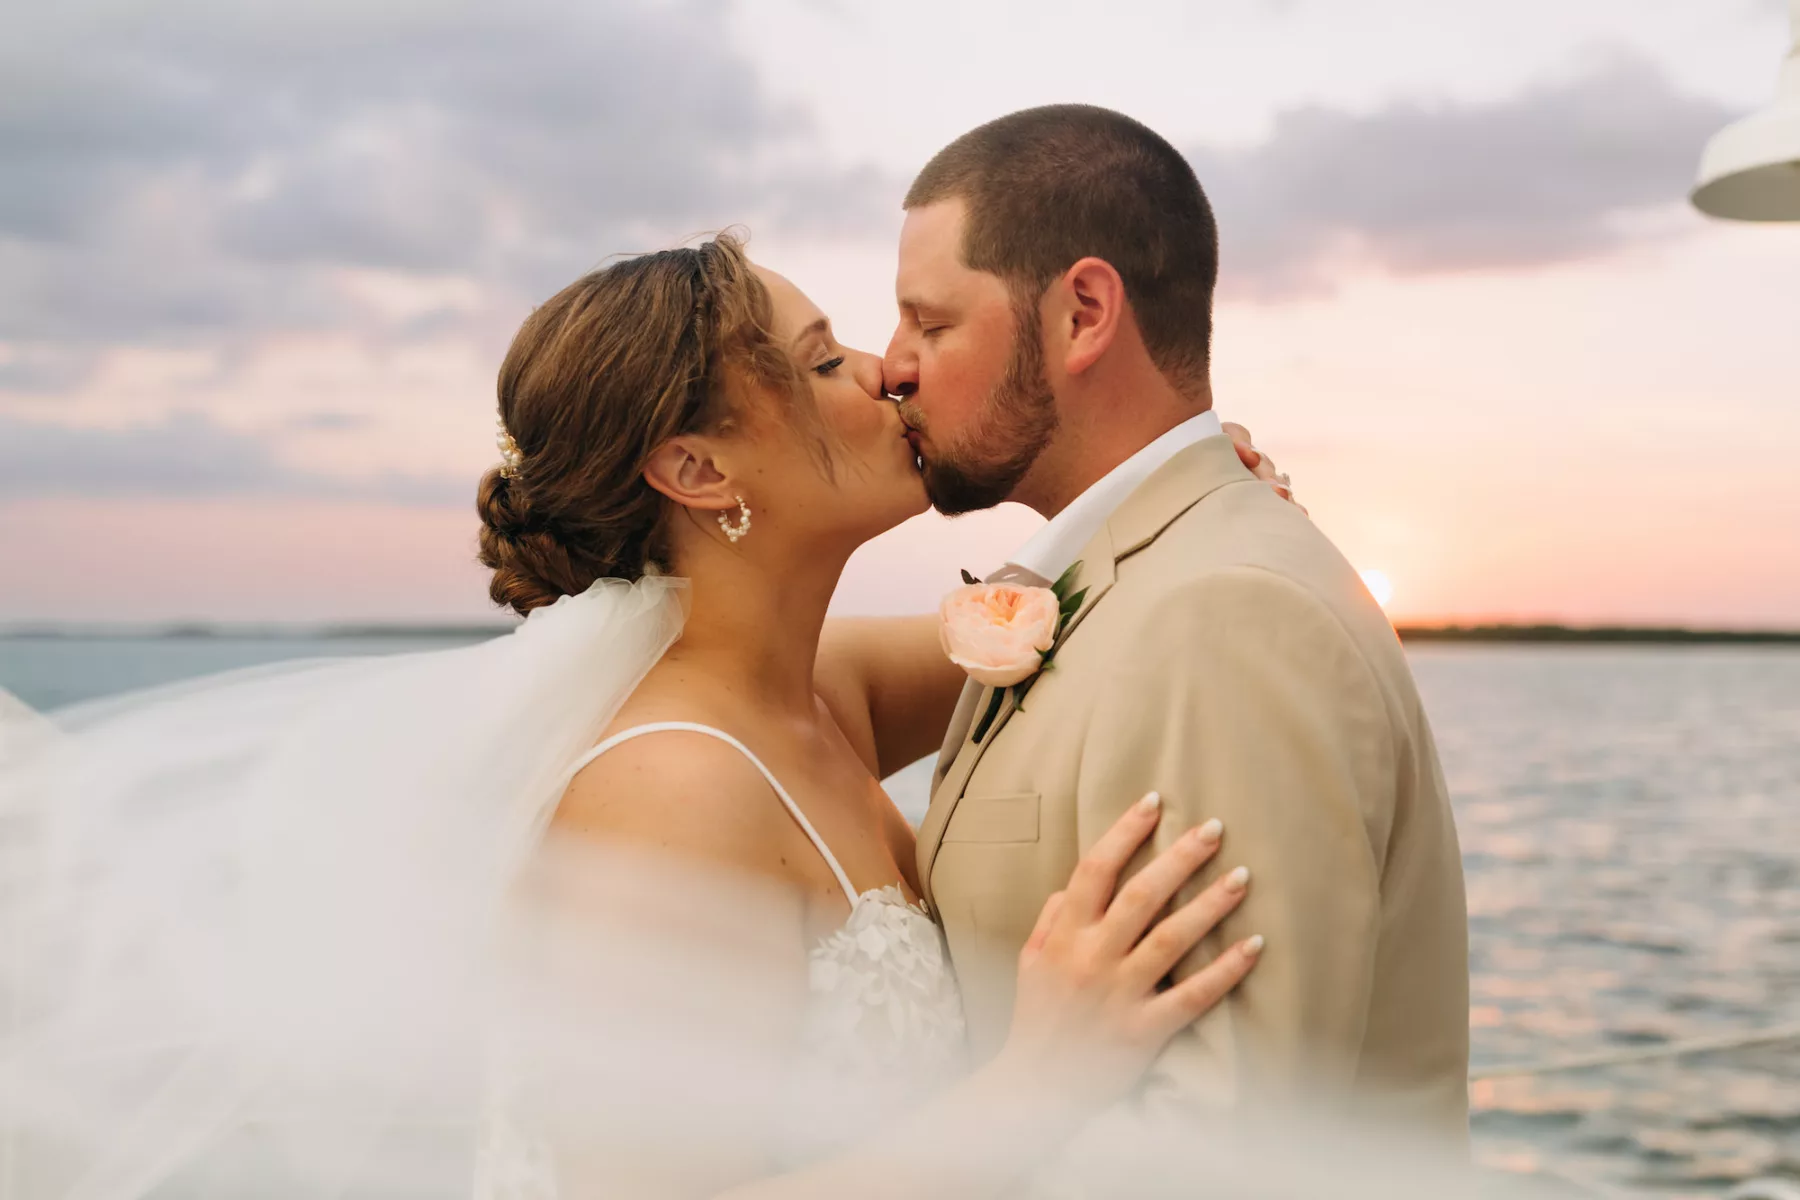 Bride and Groom Sunset Wedding Portrait | Tampa Bay Photographer Amber McWhorter Photography